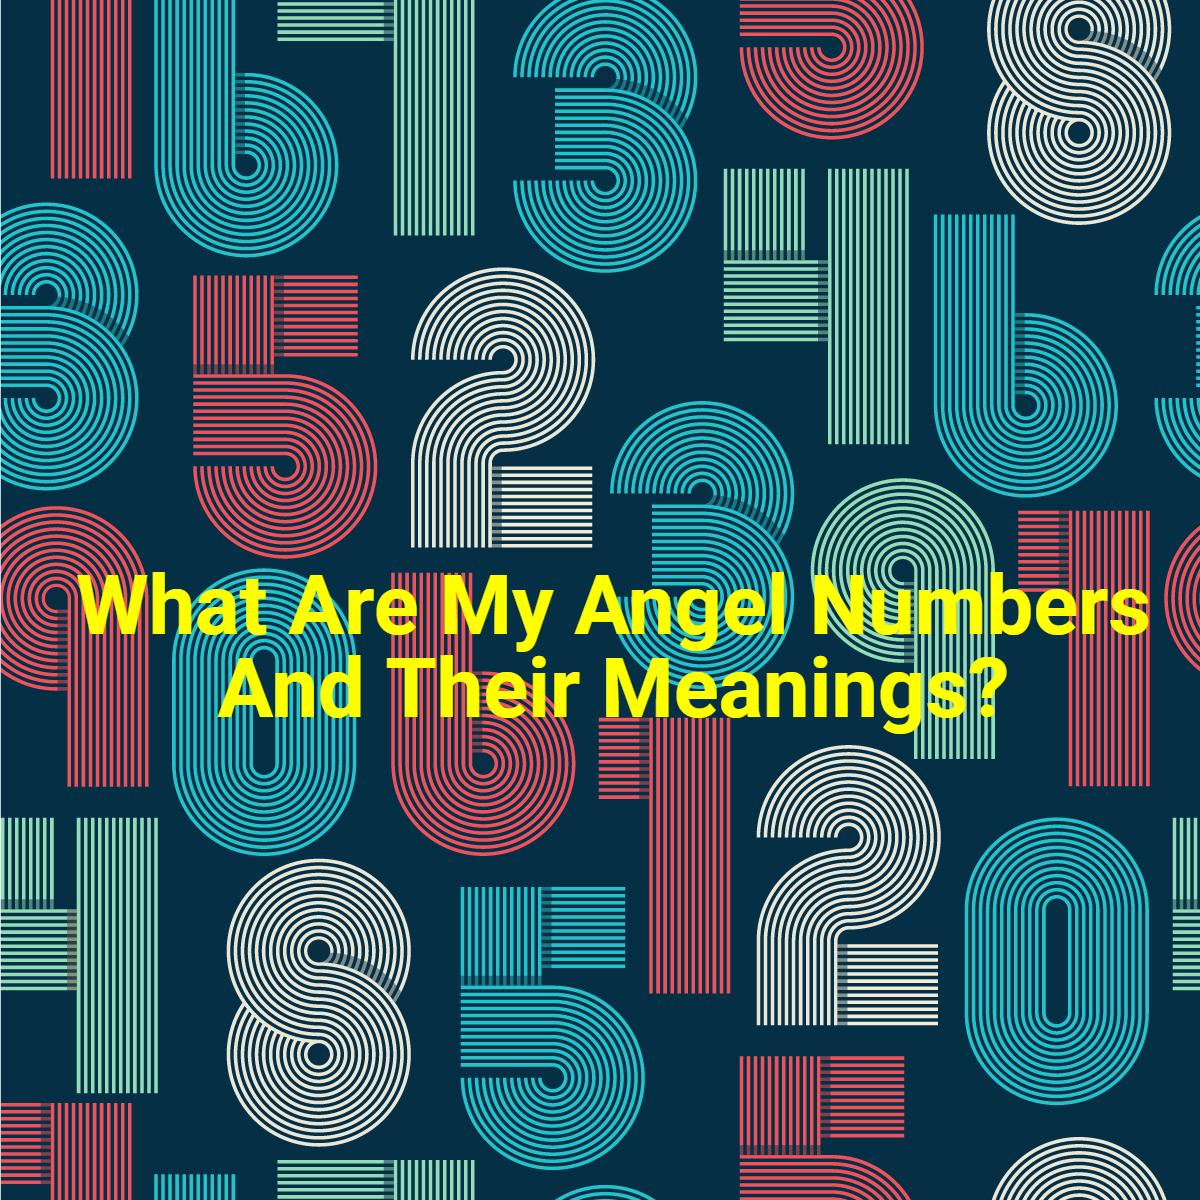 What Are My Angel Numbers And Their Meanings? How You Can Use Them To Help Yourself?